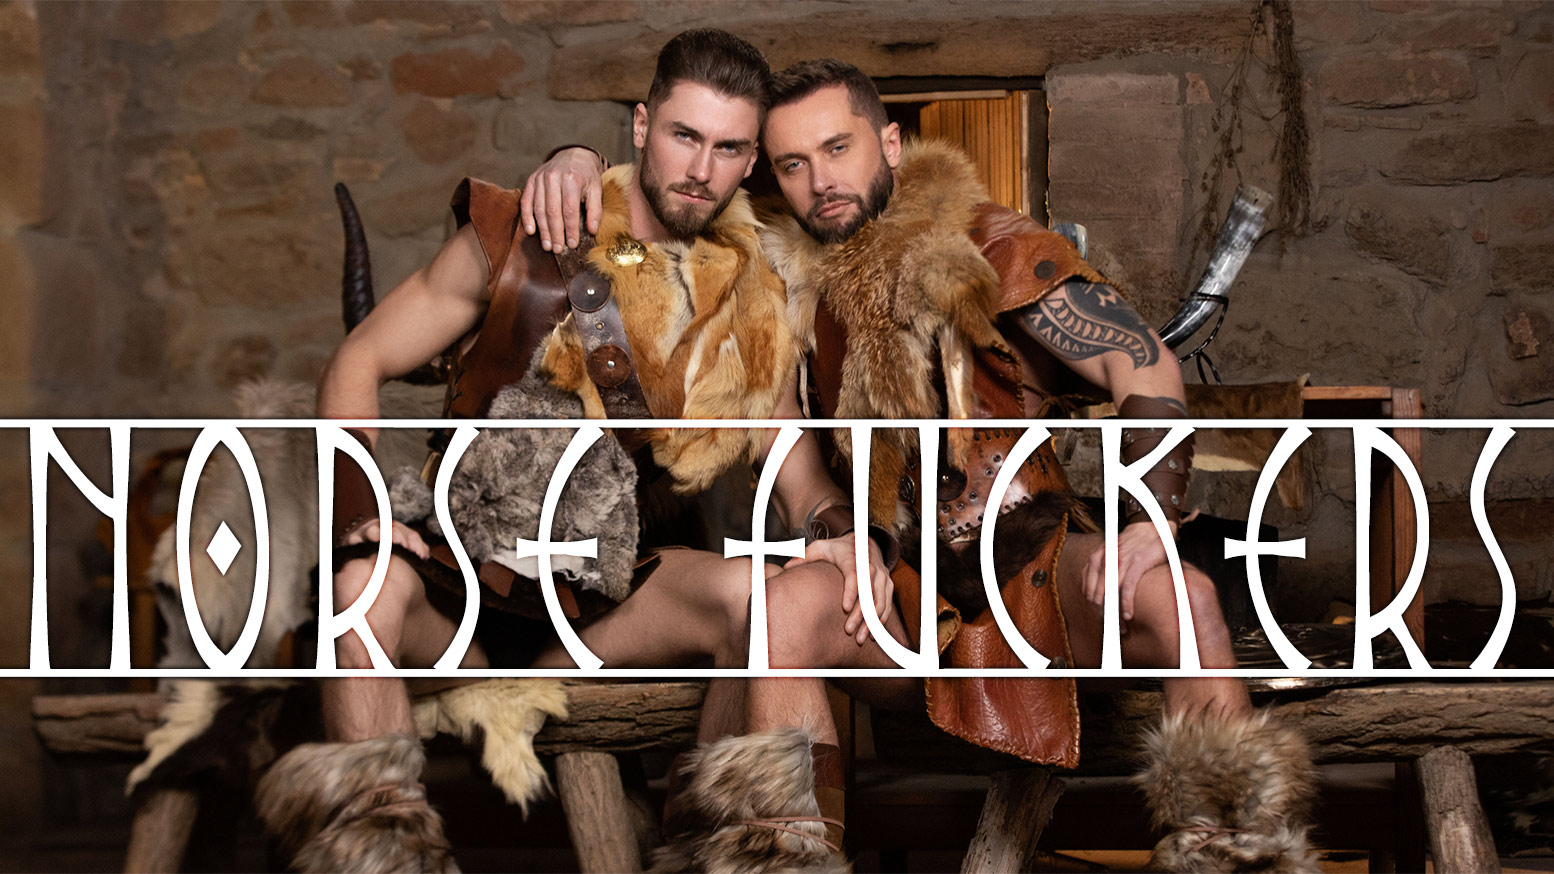 MEN Tyler Berg and Craig Marks in Norse Fuckers, Part 1 photo